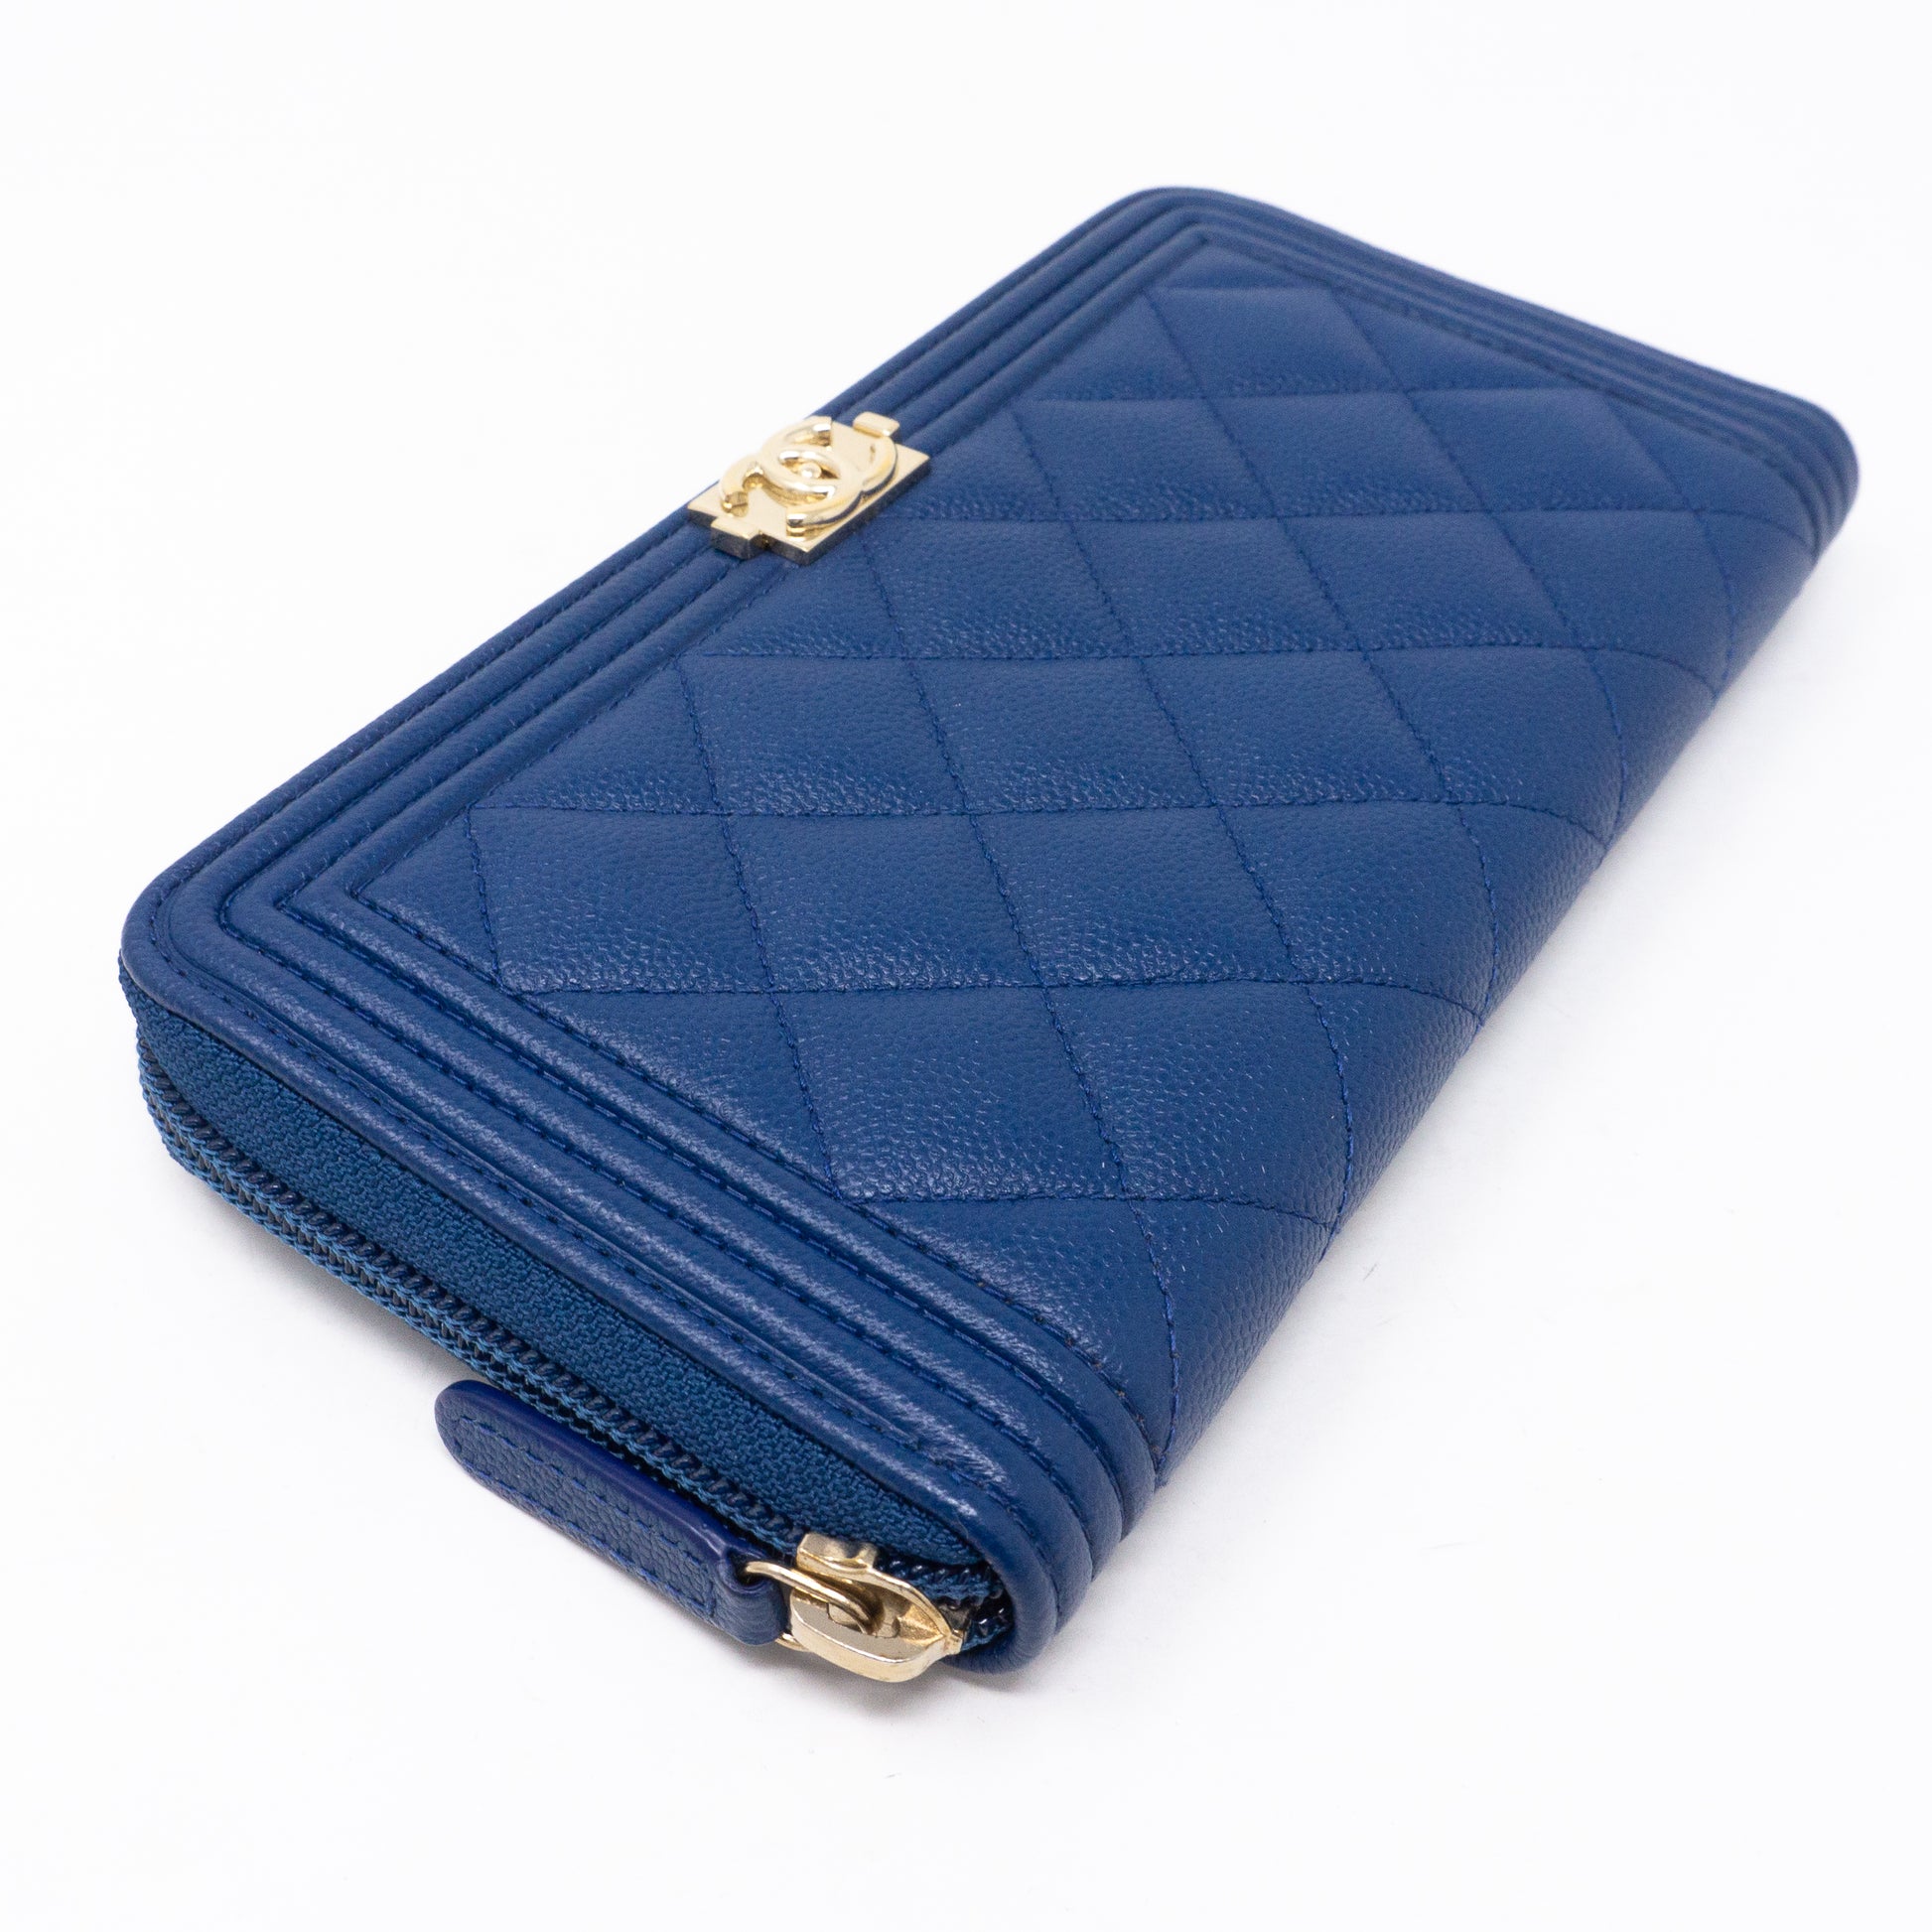 CHANEL Caviar Leather Zip Around Small Wallet - Blue NWT